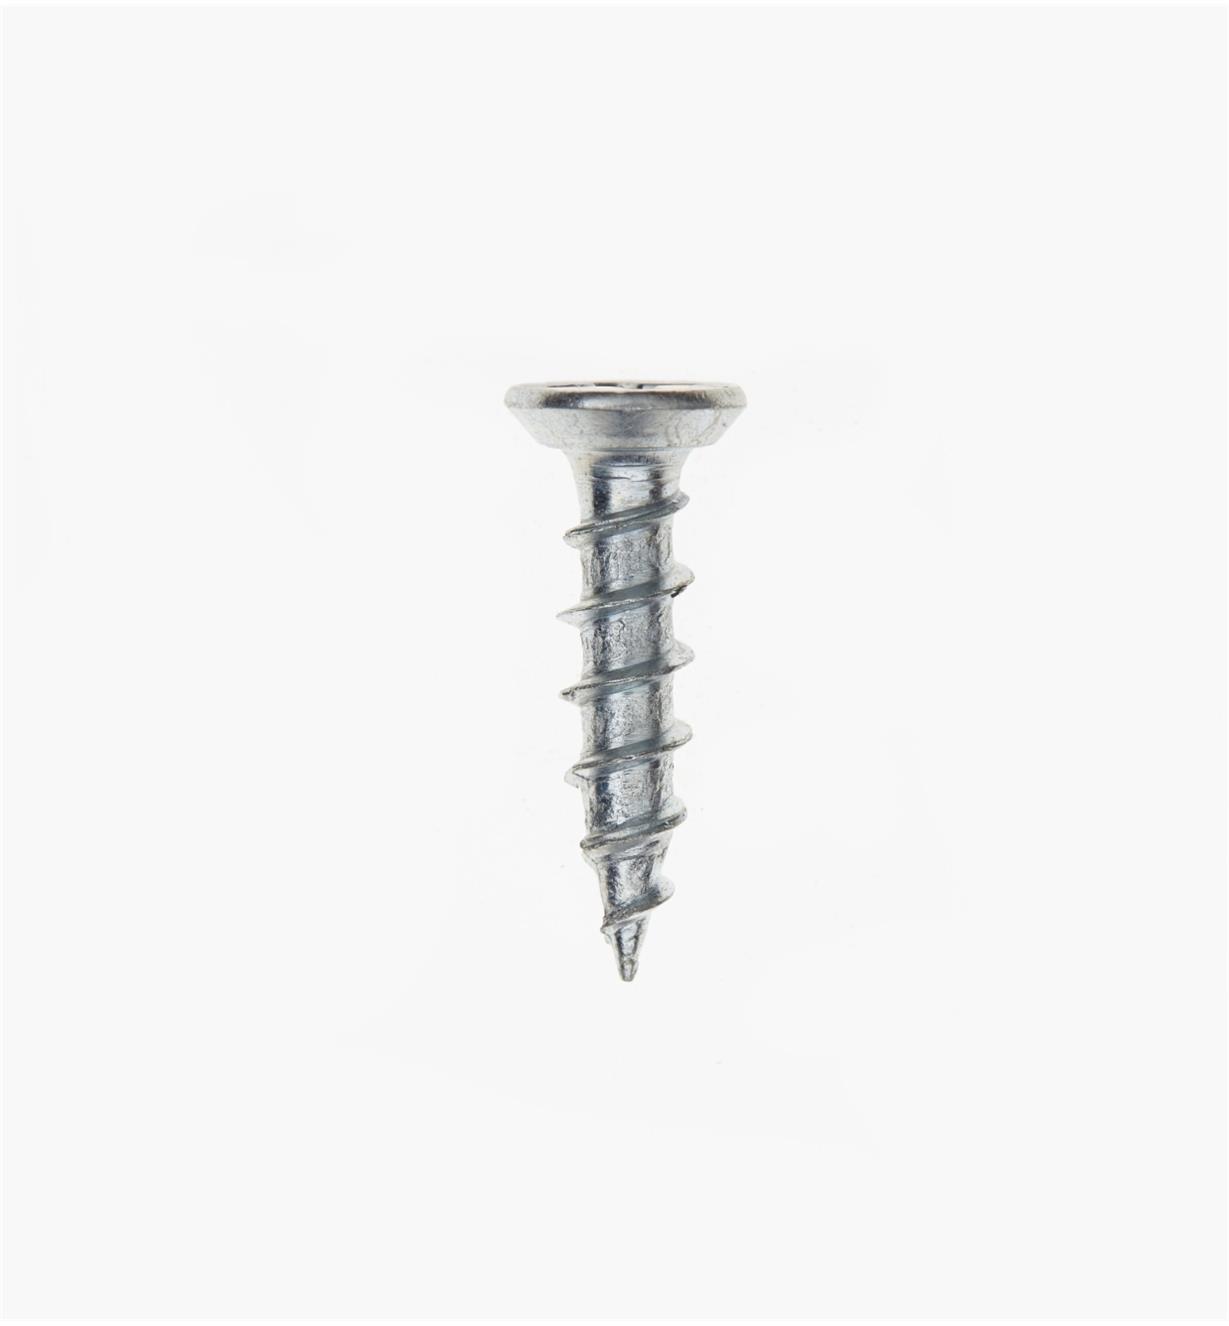 Side view of #6 × 5/8" Zinc-Plated Hinge Screw